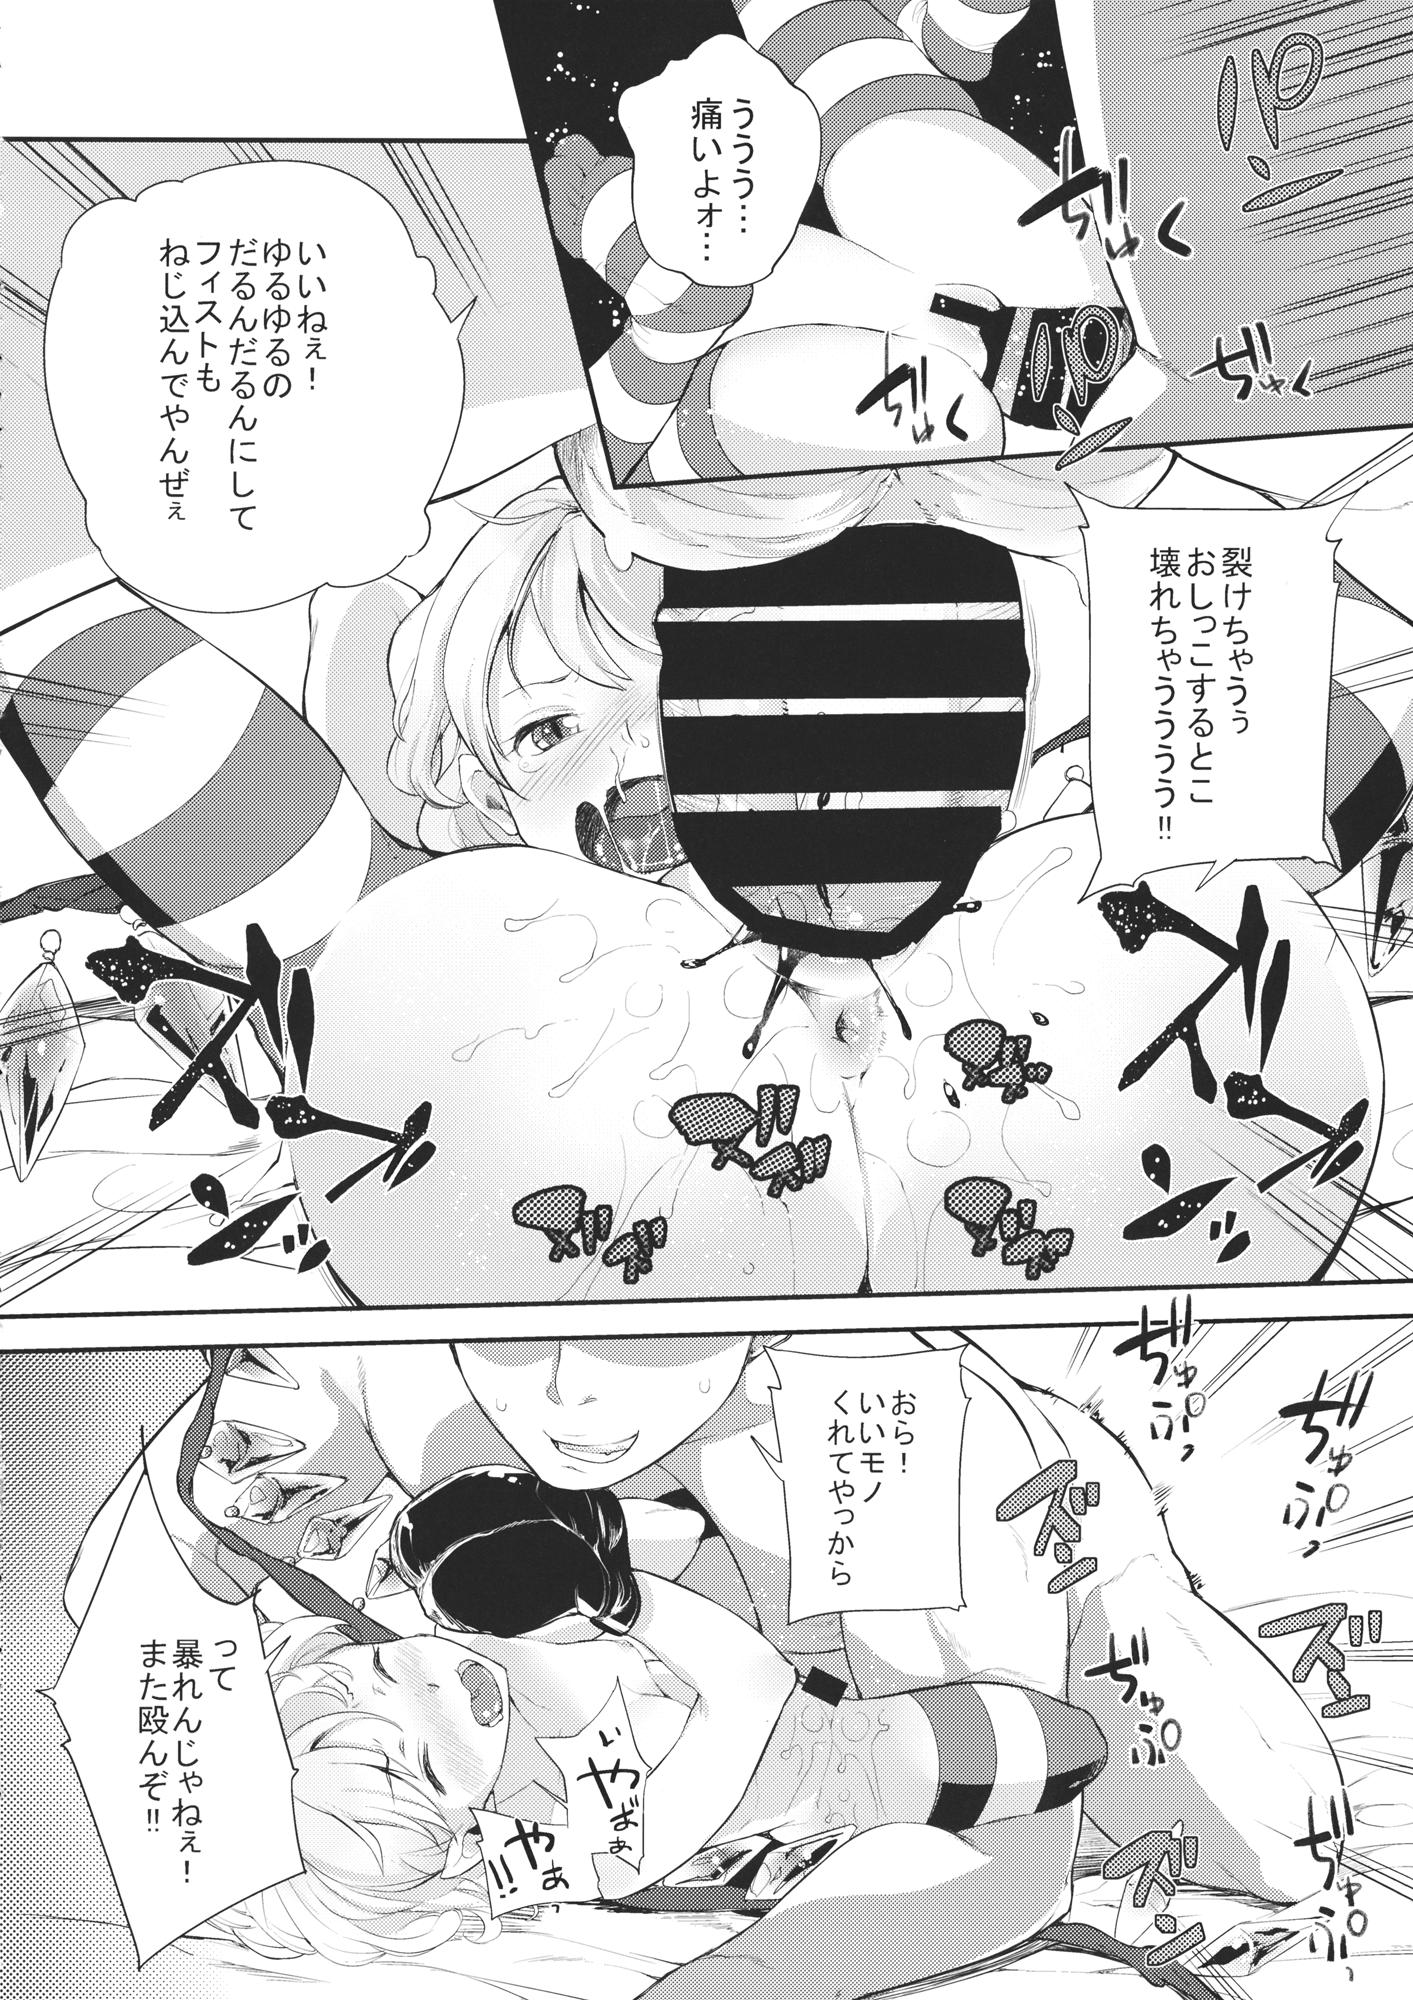 Real Amateur SUPER HARD Hatsujou Imouto - Touhou project First Time - Page 7